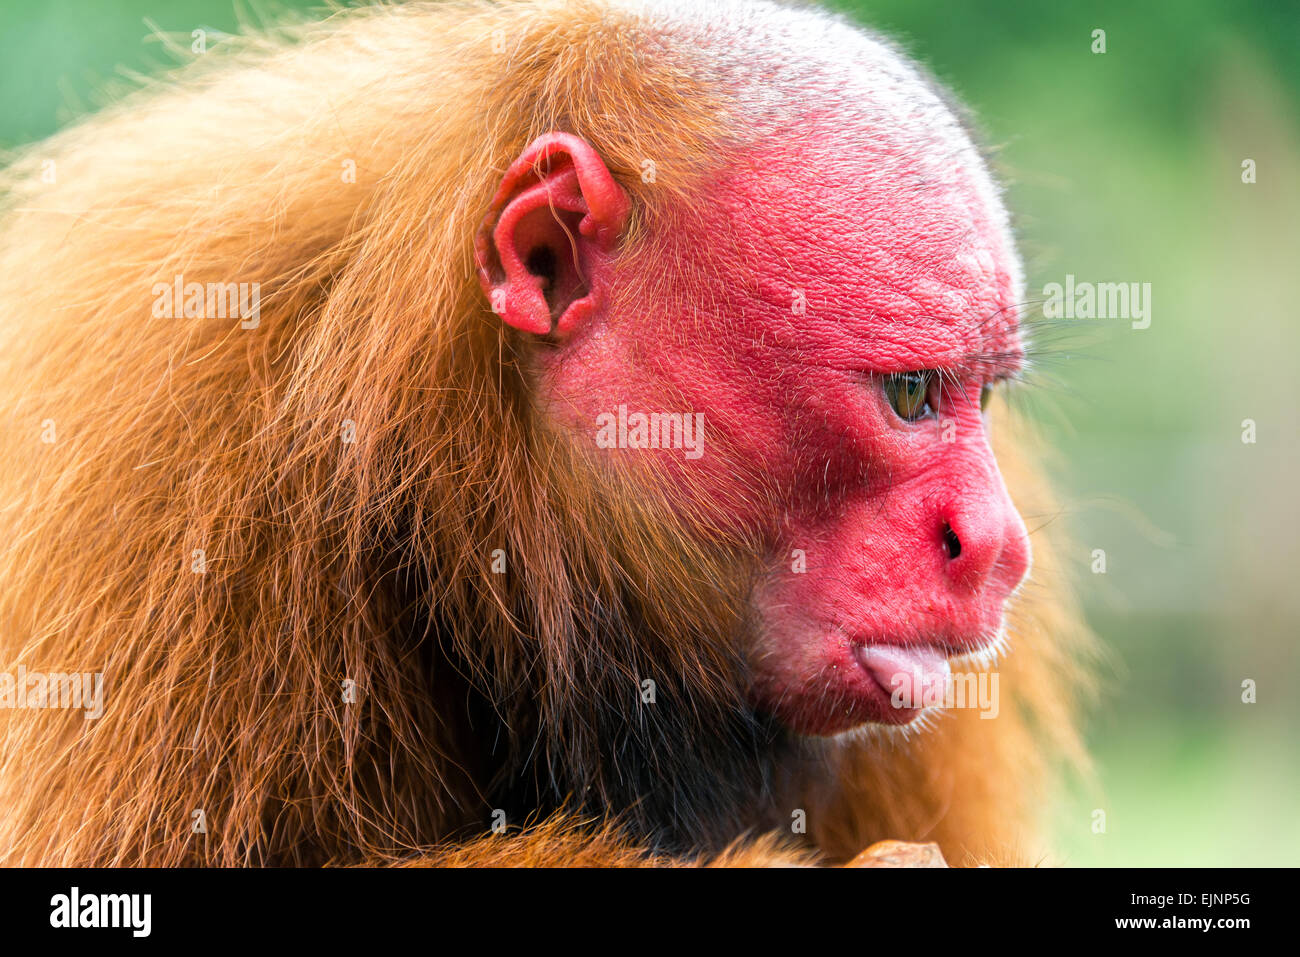 Closeup view of the face of a Bald Uakari monkey in the Amazon Rainforest near Iquitos, Peru Stock Photo